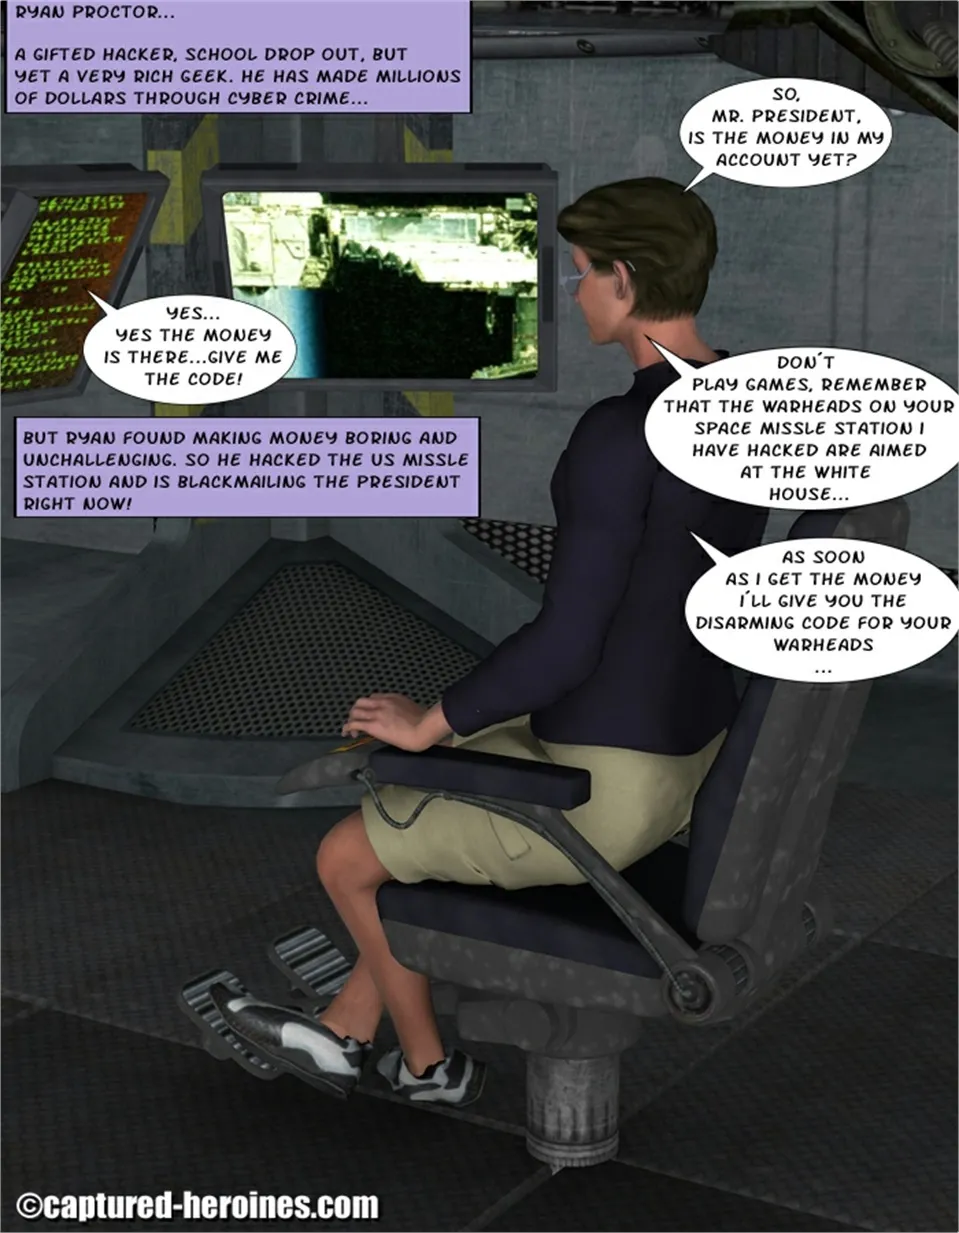 The Geek’s First Strike 1&2 – Merovingian - Page 1